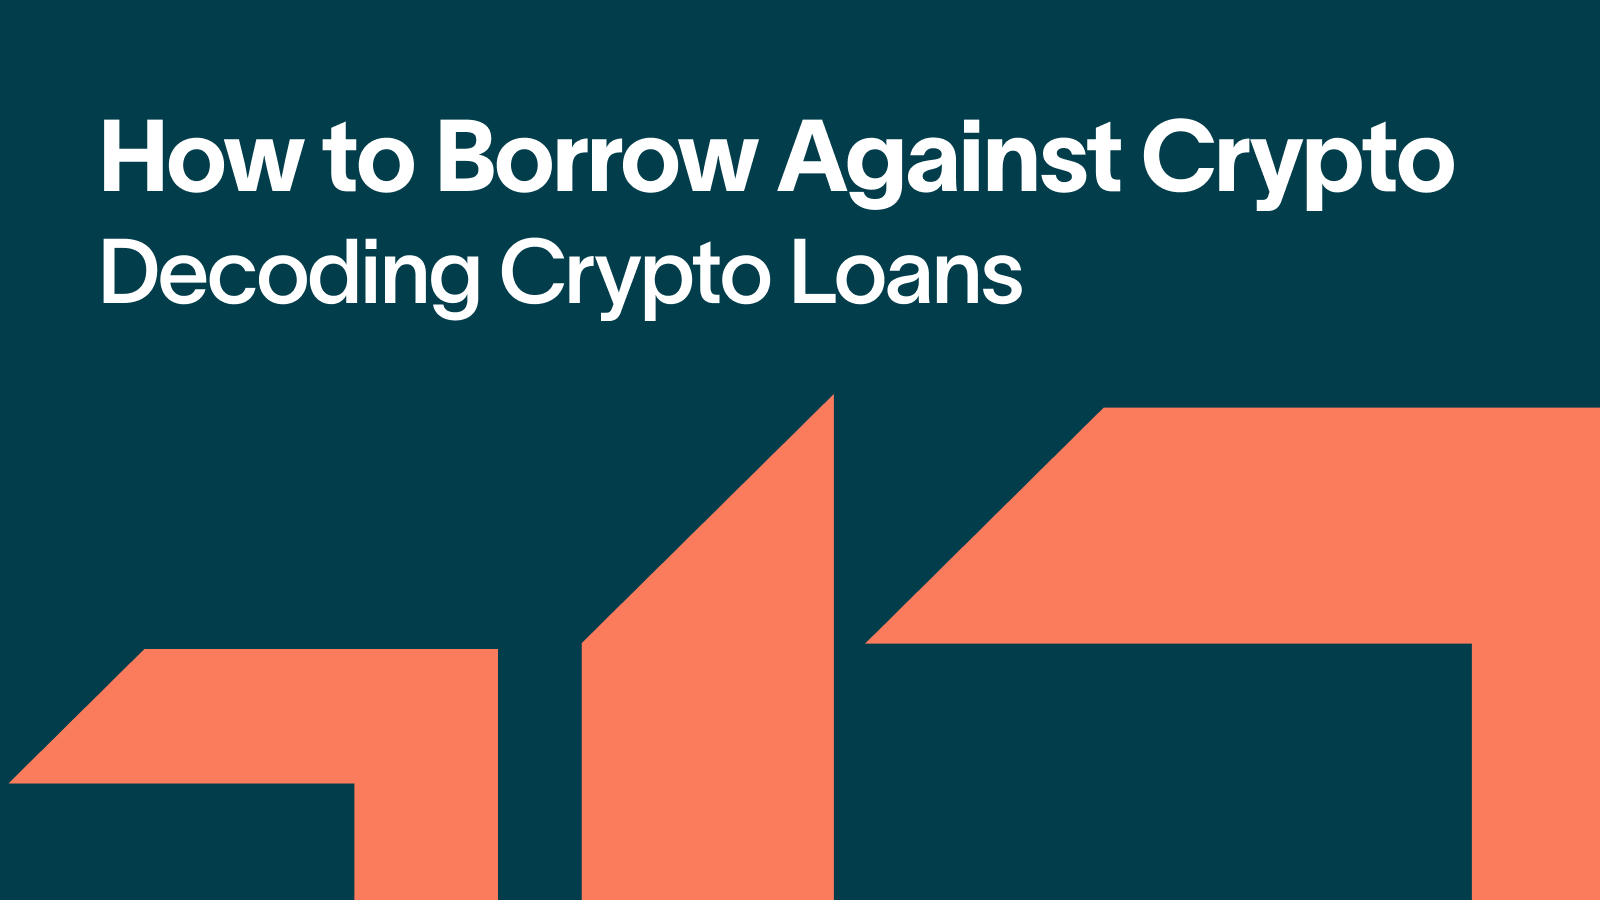 Cryptocurrency lending and borrowing